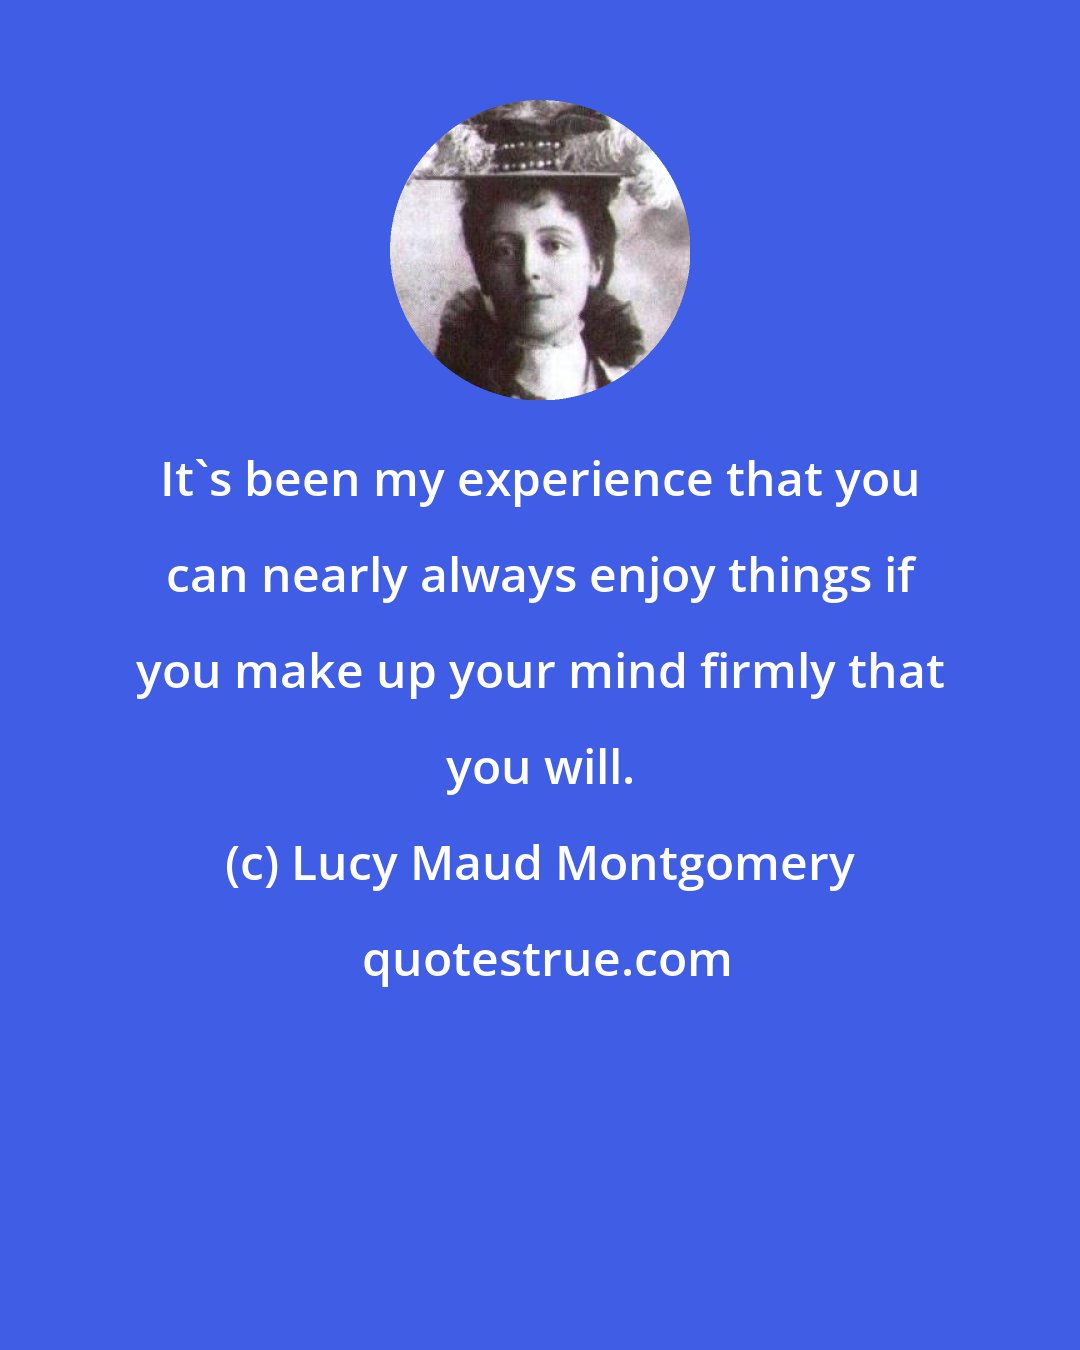 Lucy Maud Montgomery: It's been my experience that you can nearly always enjoy things if you make up your mind firmly that you will.